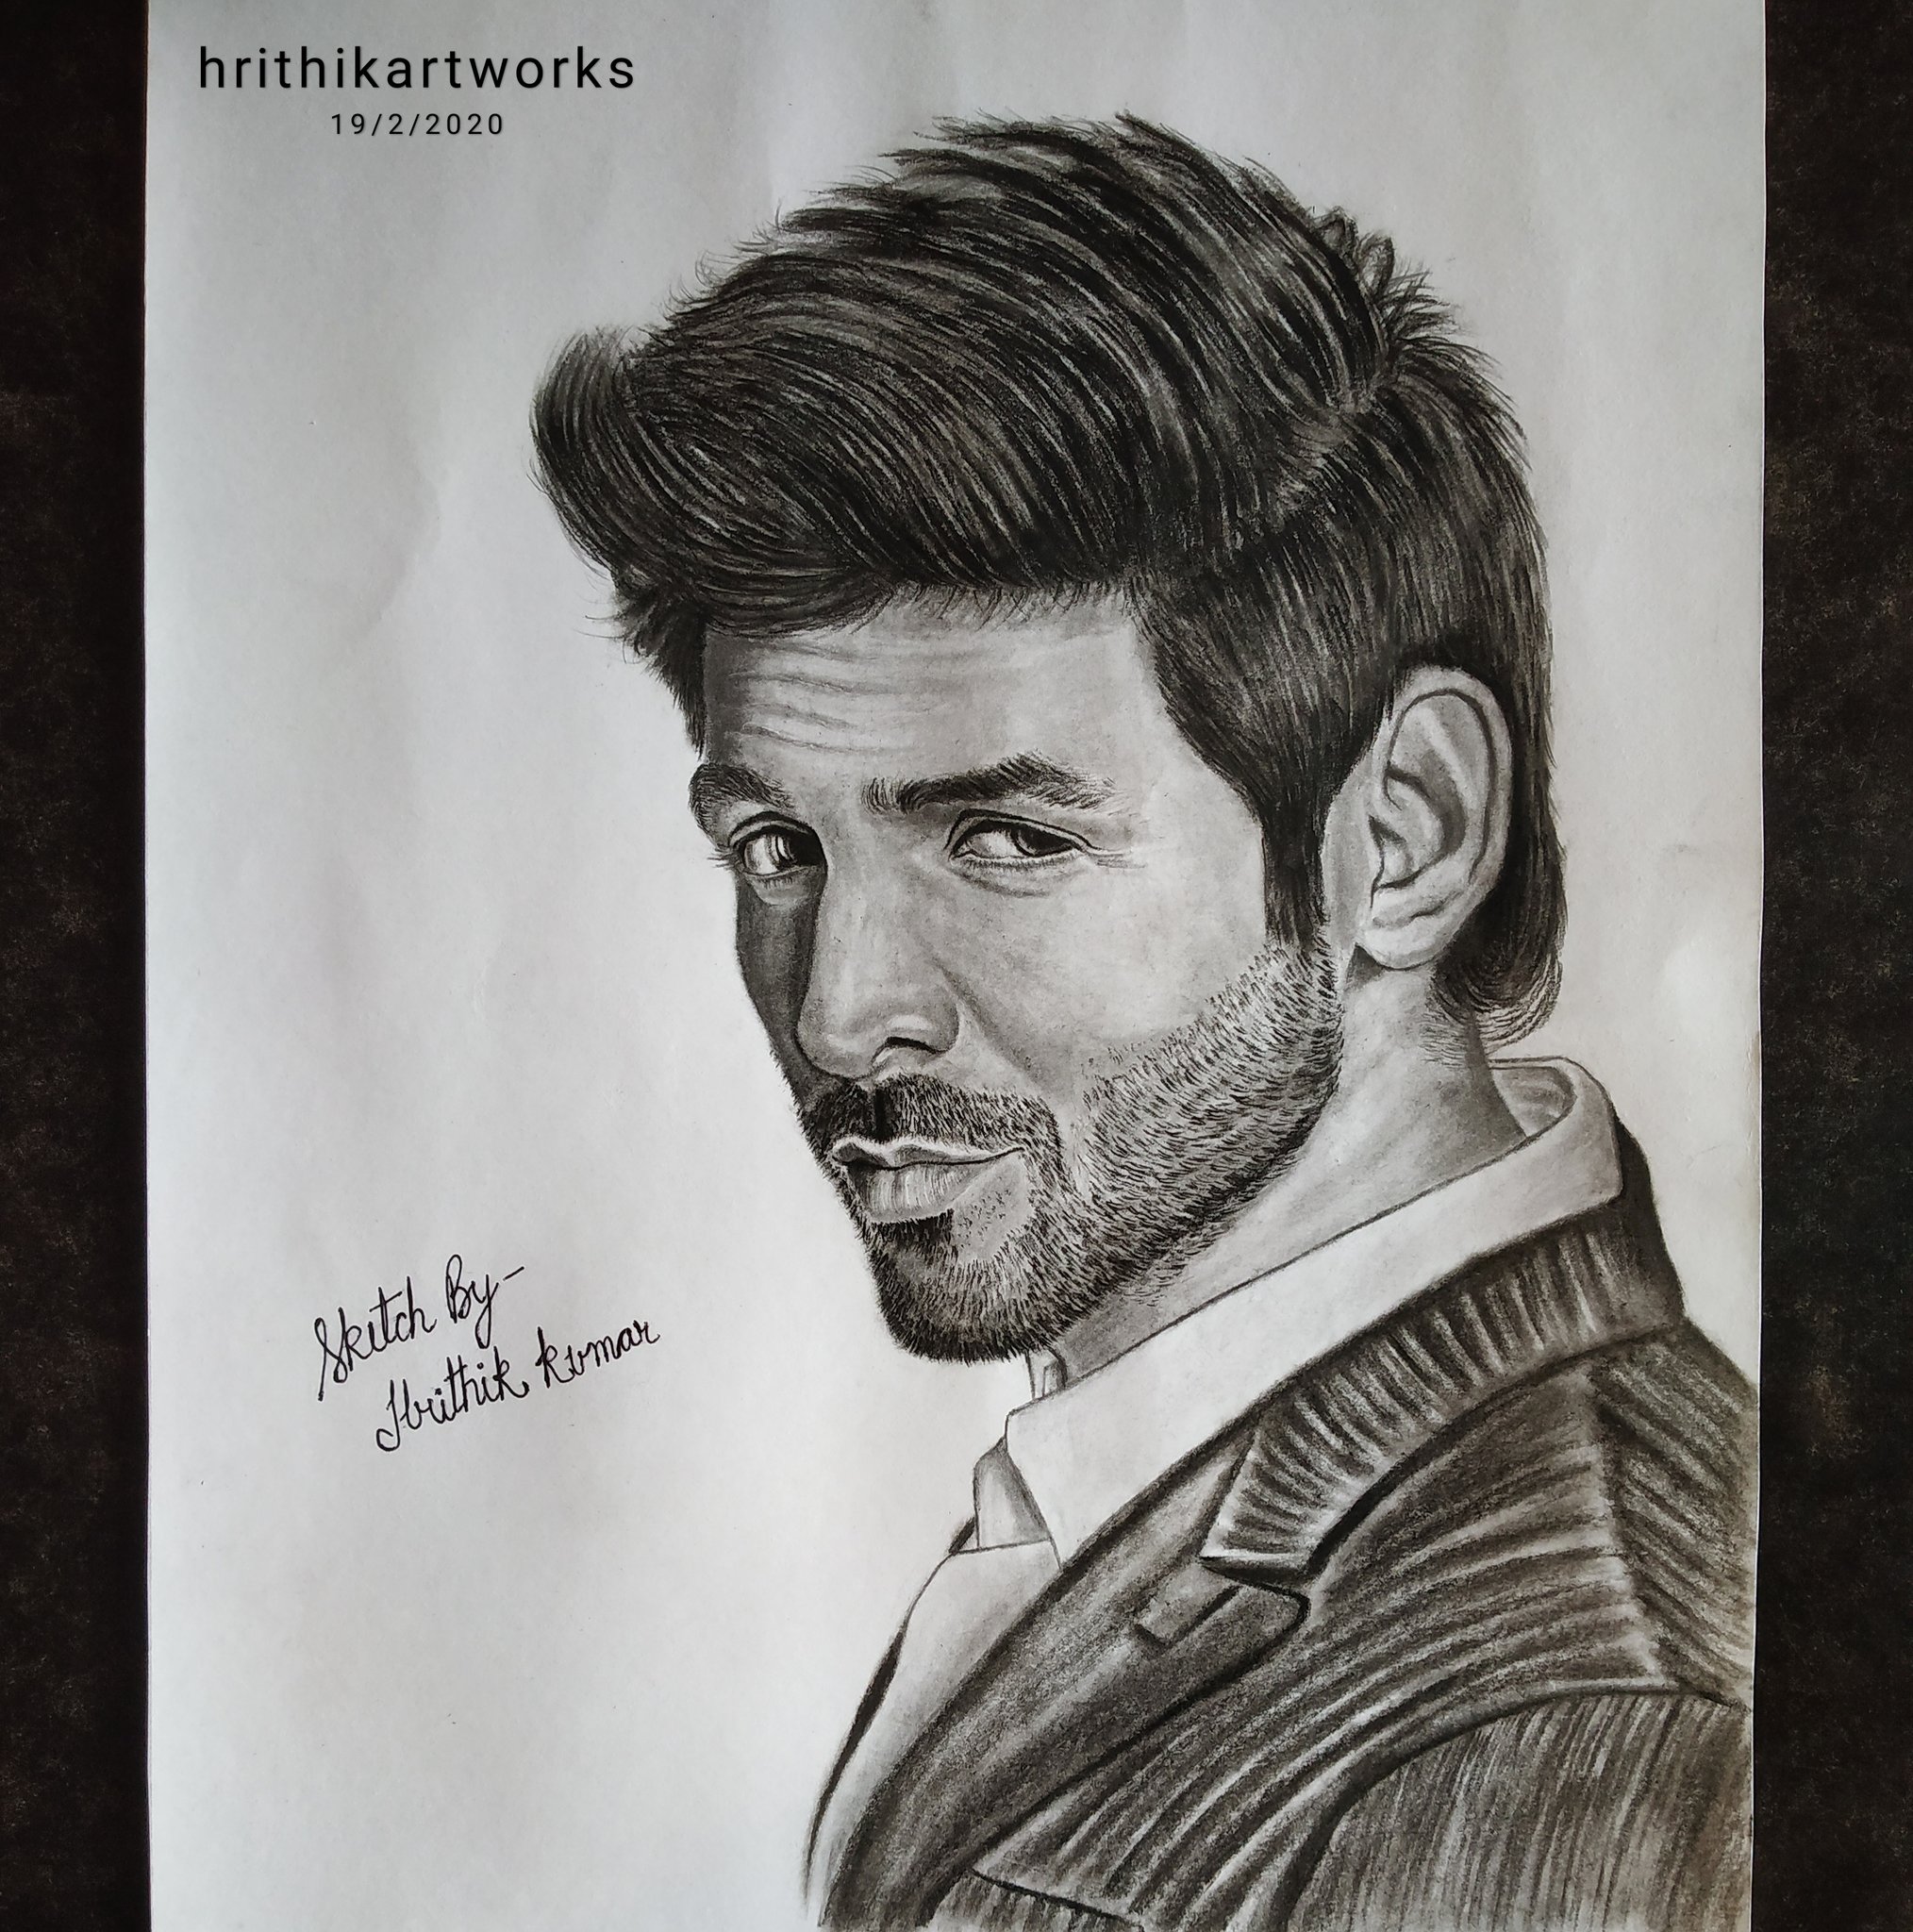 Arteens  Pencil Sketch Of Kartik Aaryan  Trying to get the identity DM  For Orders Arteens art artist arteens sketch KartikAaryan  pencilsketch charcoal black white strokes gift giftsolution  masterpiece ideaForGift For